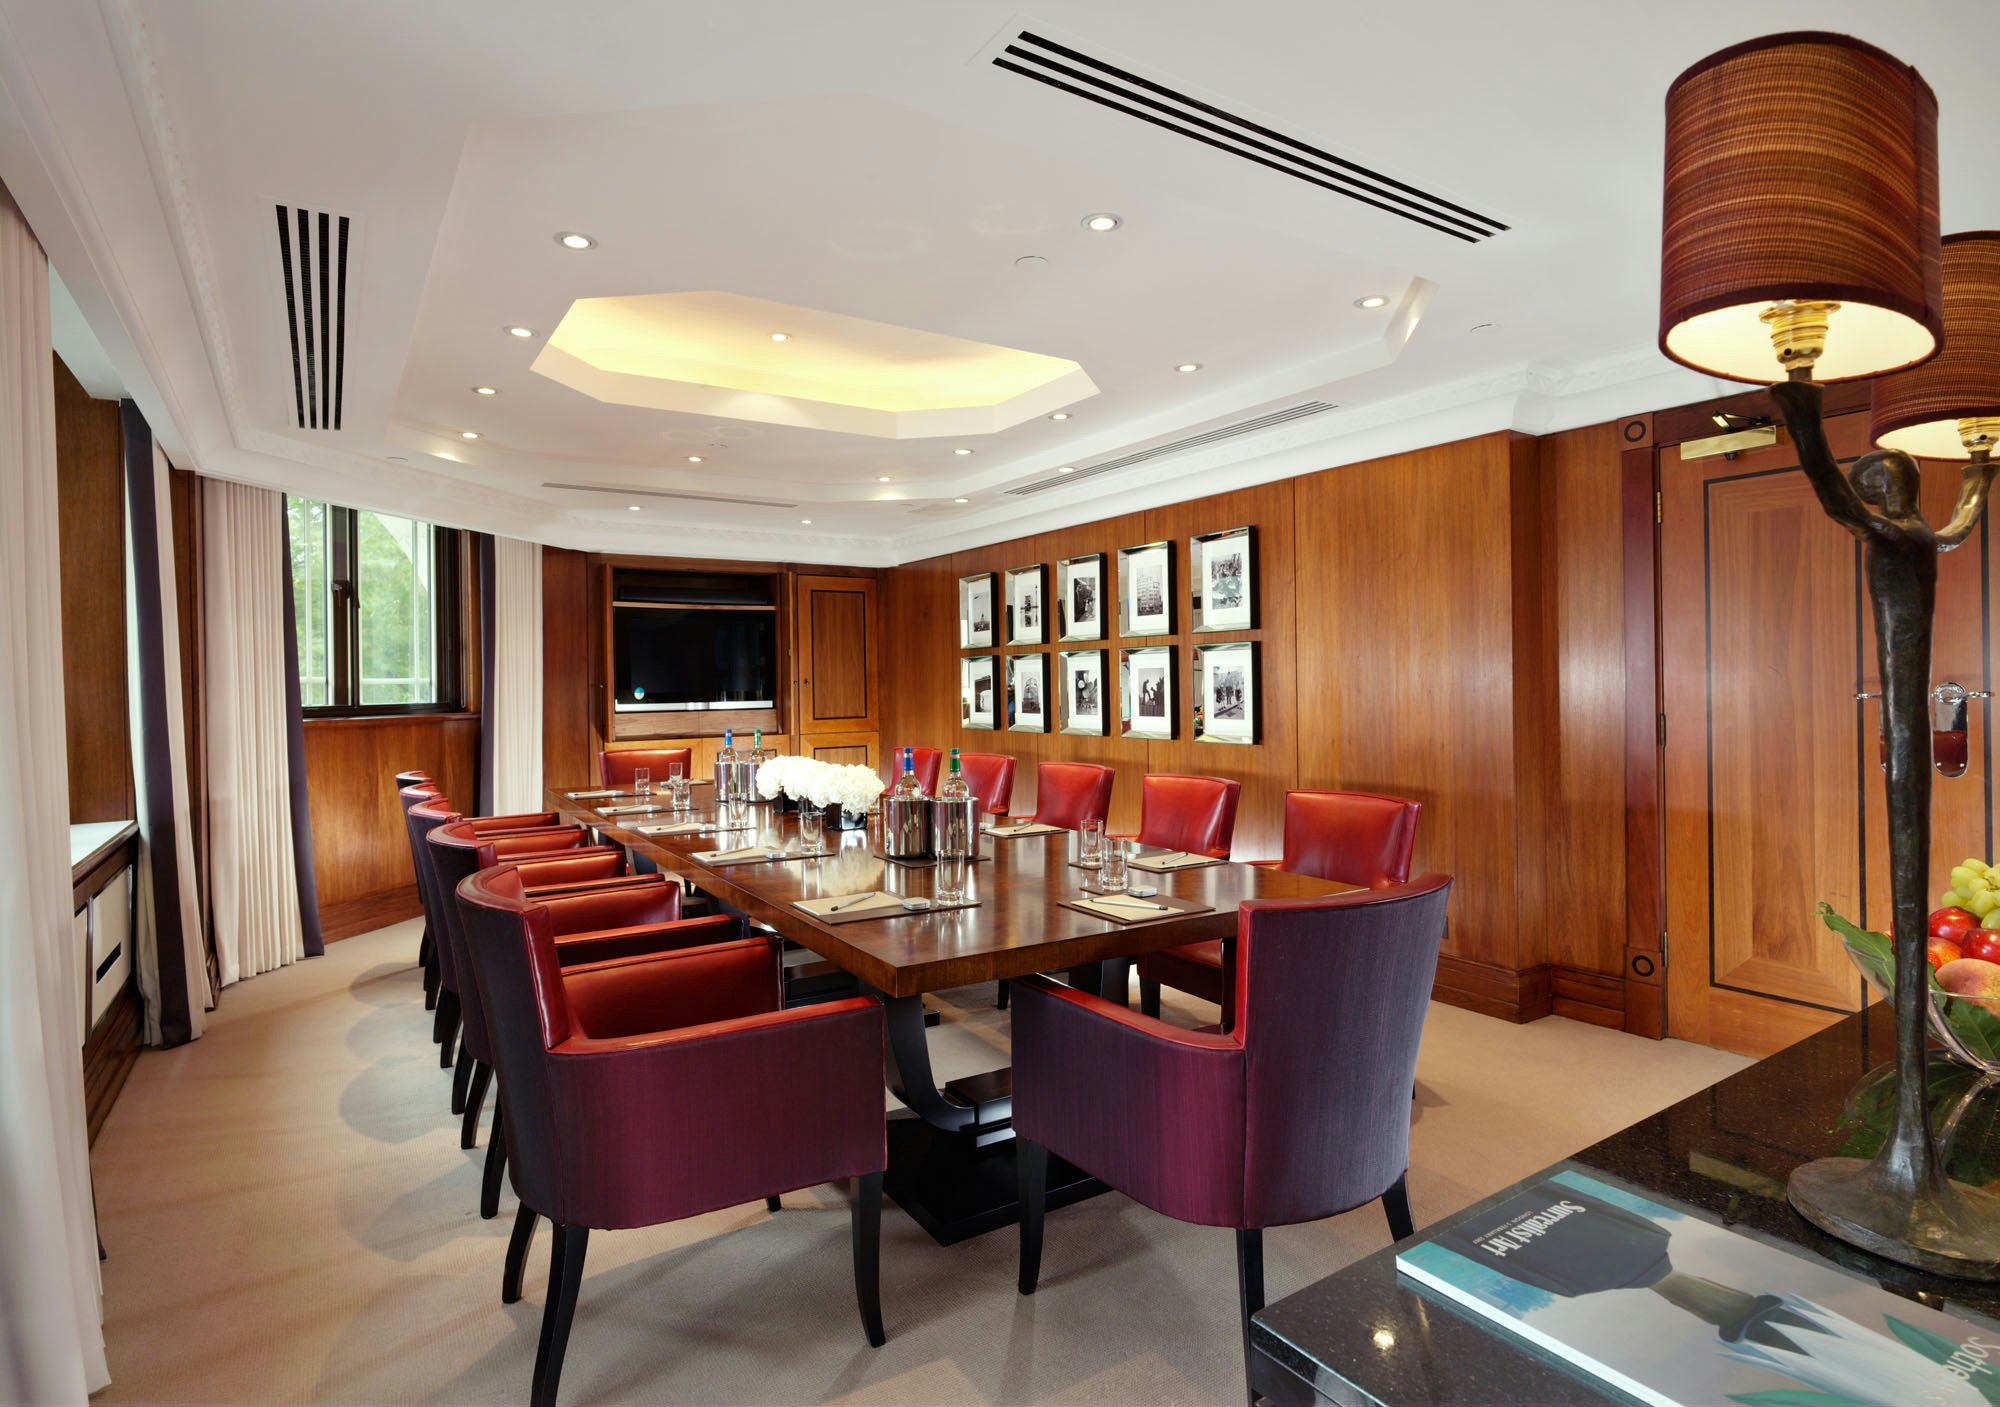 Meeting Spaces Venues in London - The Dorchester